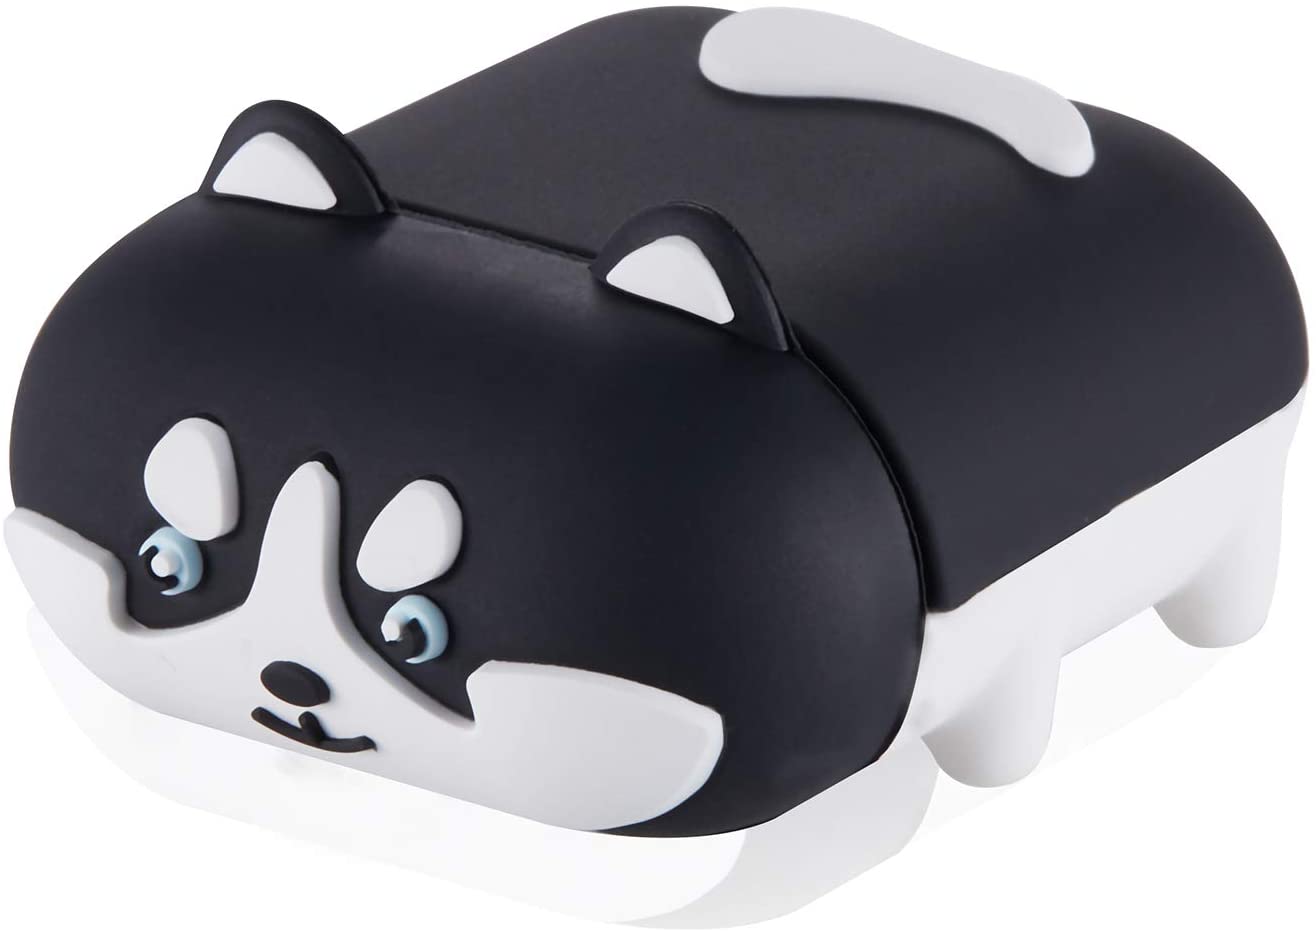 Husky Dog Apple Airpods & AirPods Pro Case